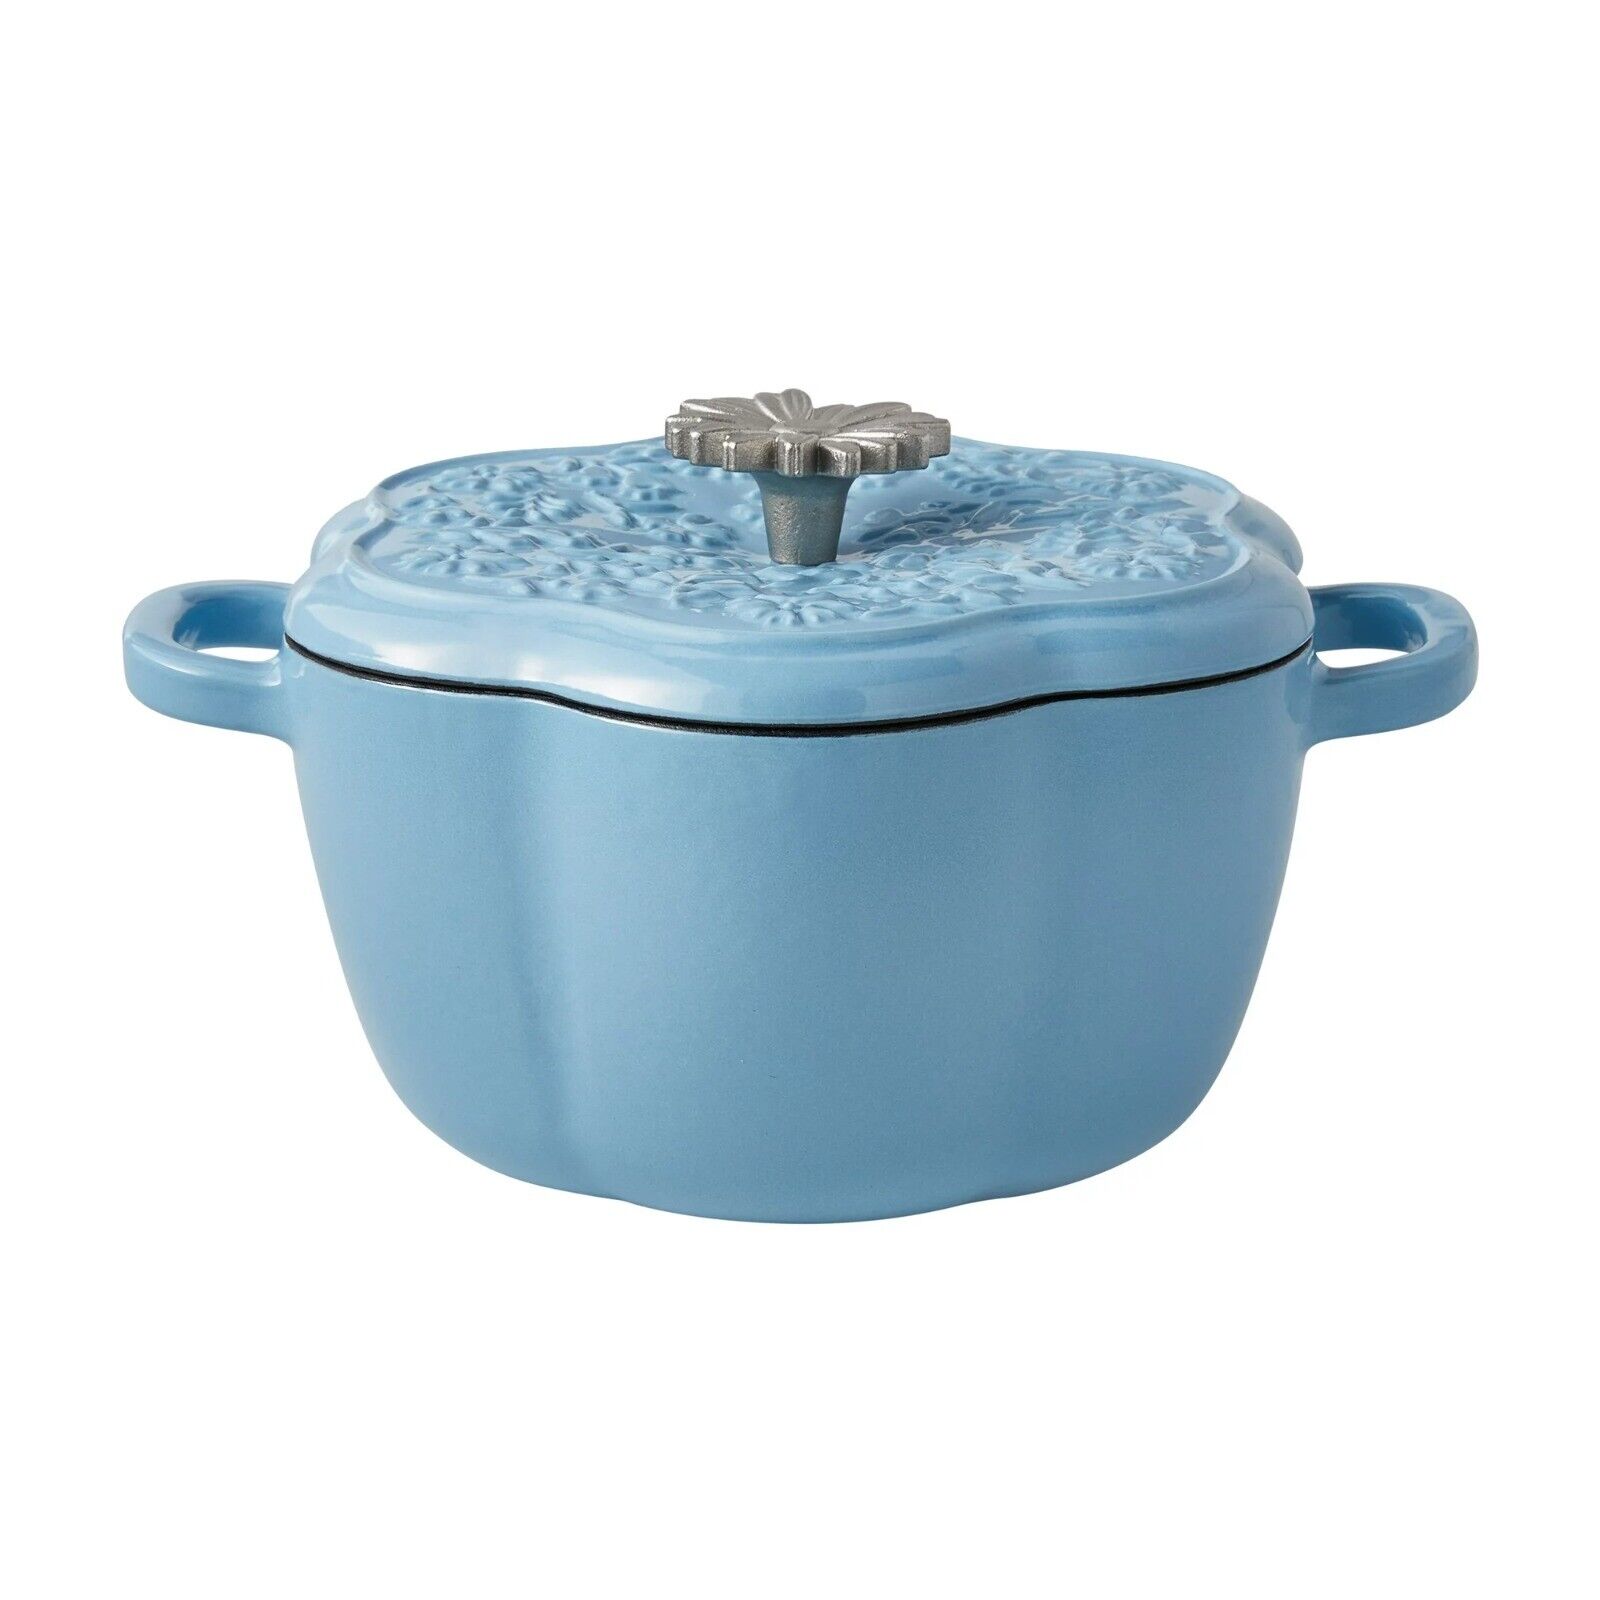 Periwinkle Enameled Cast Iron 2-Quart Dutch Oven with Lid Dutch Oven